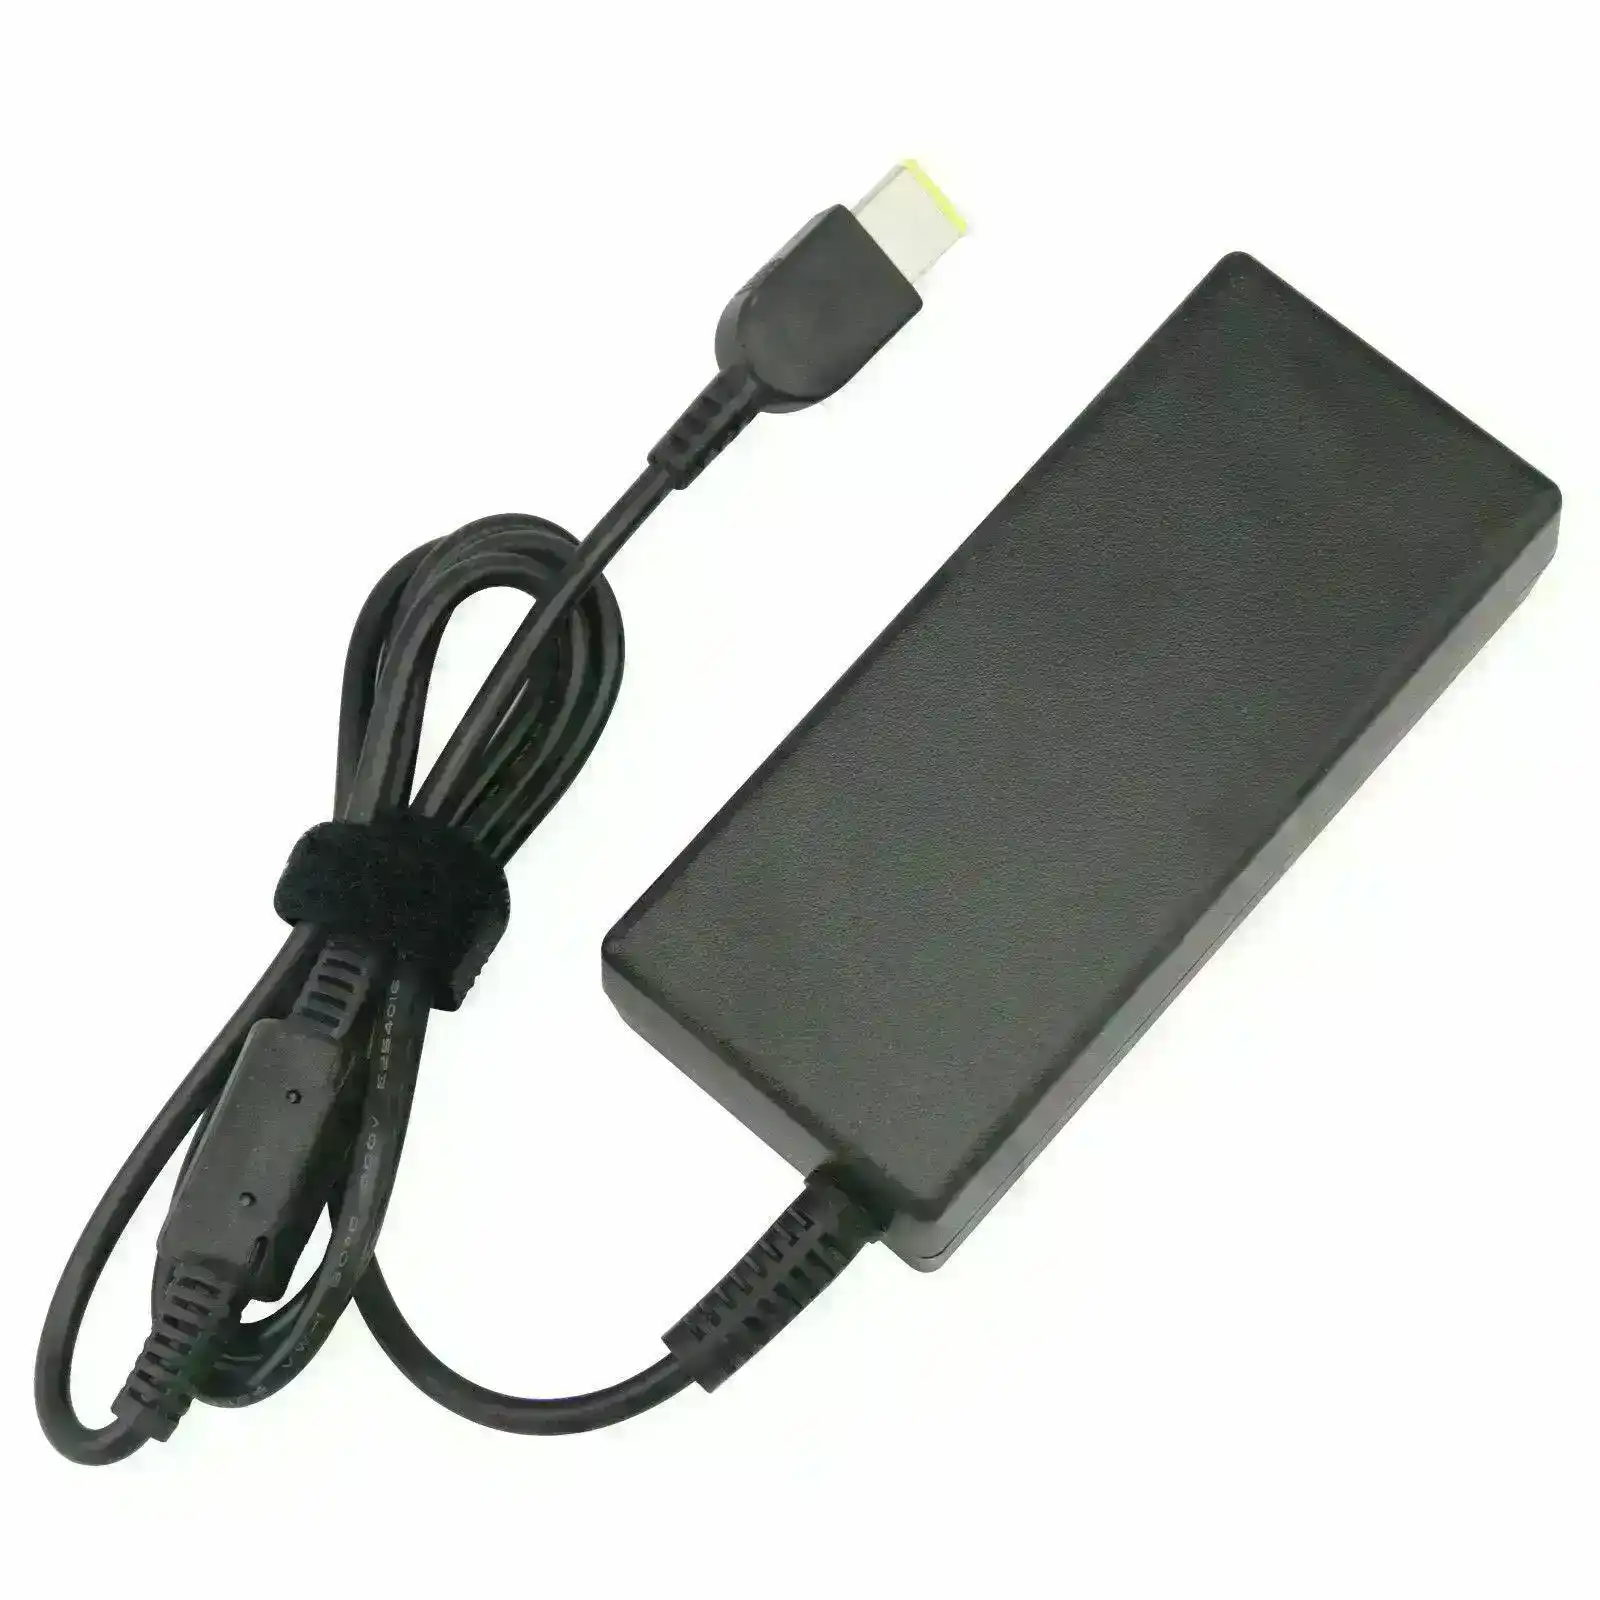 For Lenovo Thinkpad X1 Carbon Ultrabook / E470 65W Laptop Adapter Charger Power